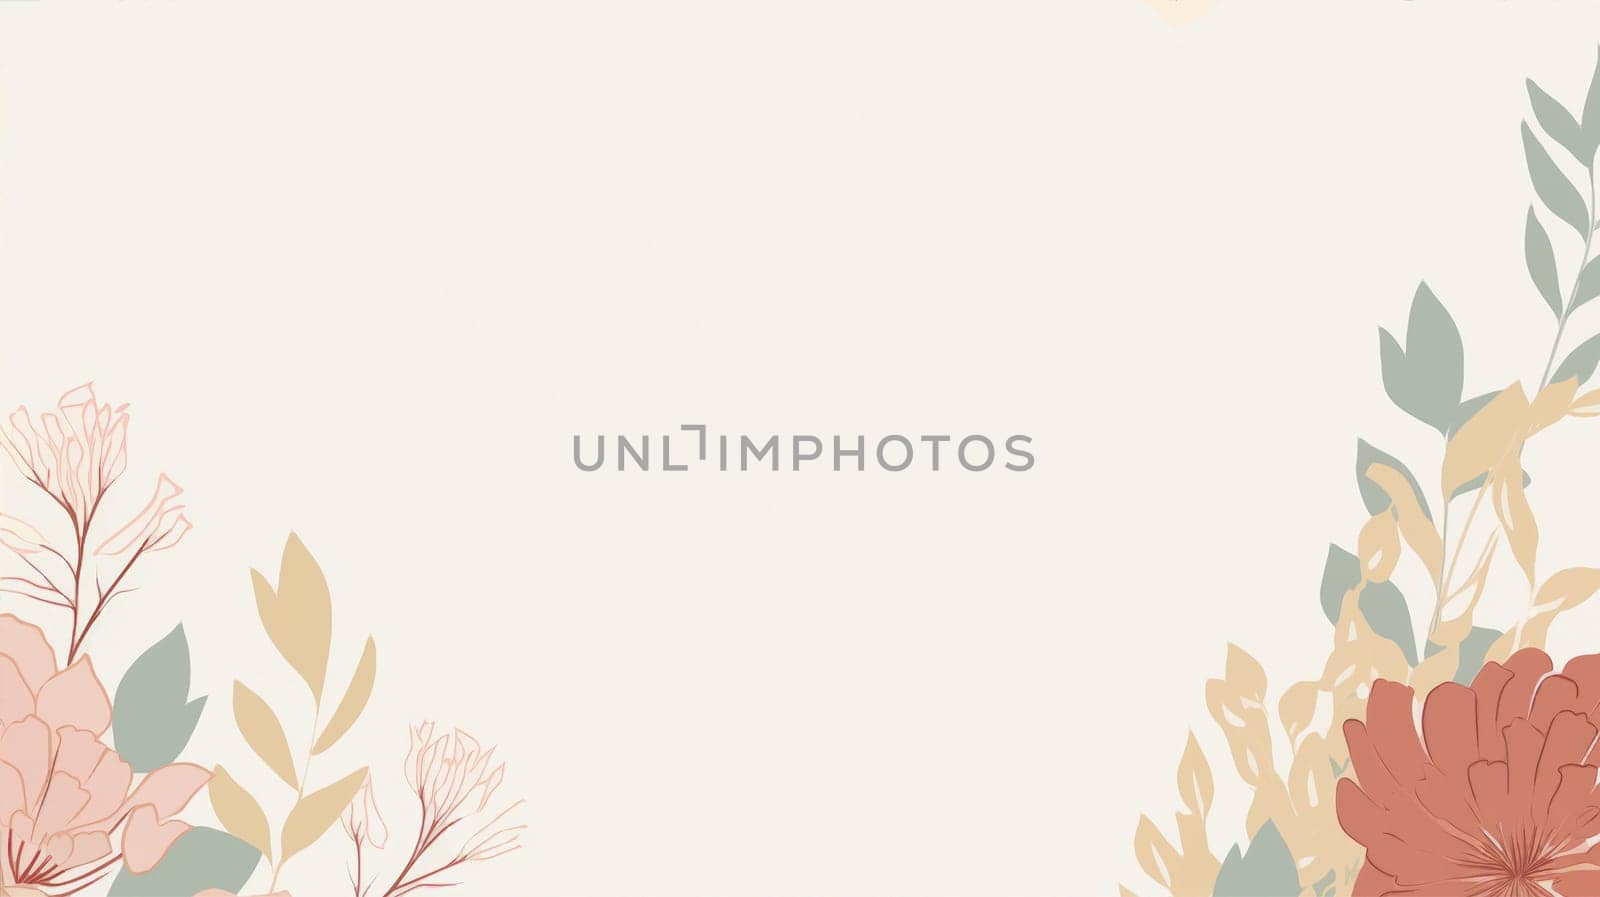 A minimalist illustration with a large empty space in the middle and a thin floral border in various colors on a plain background. Watercolor floral illustration. download